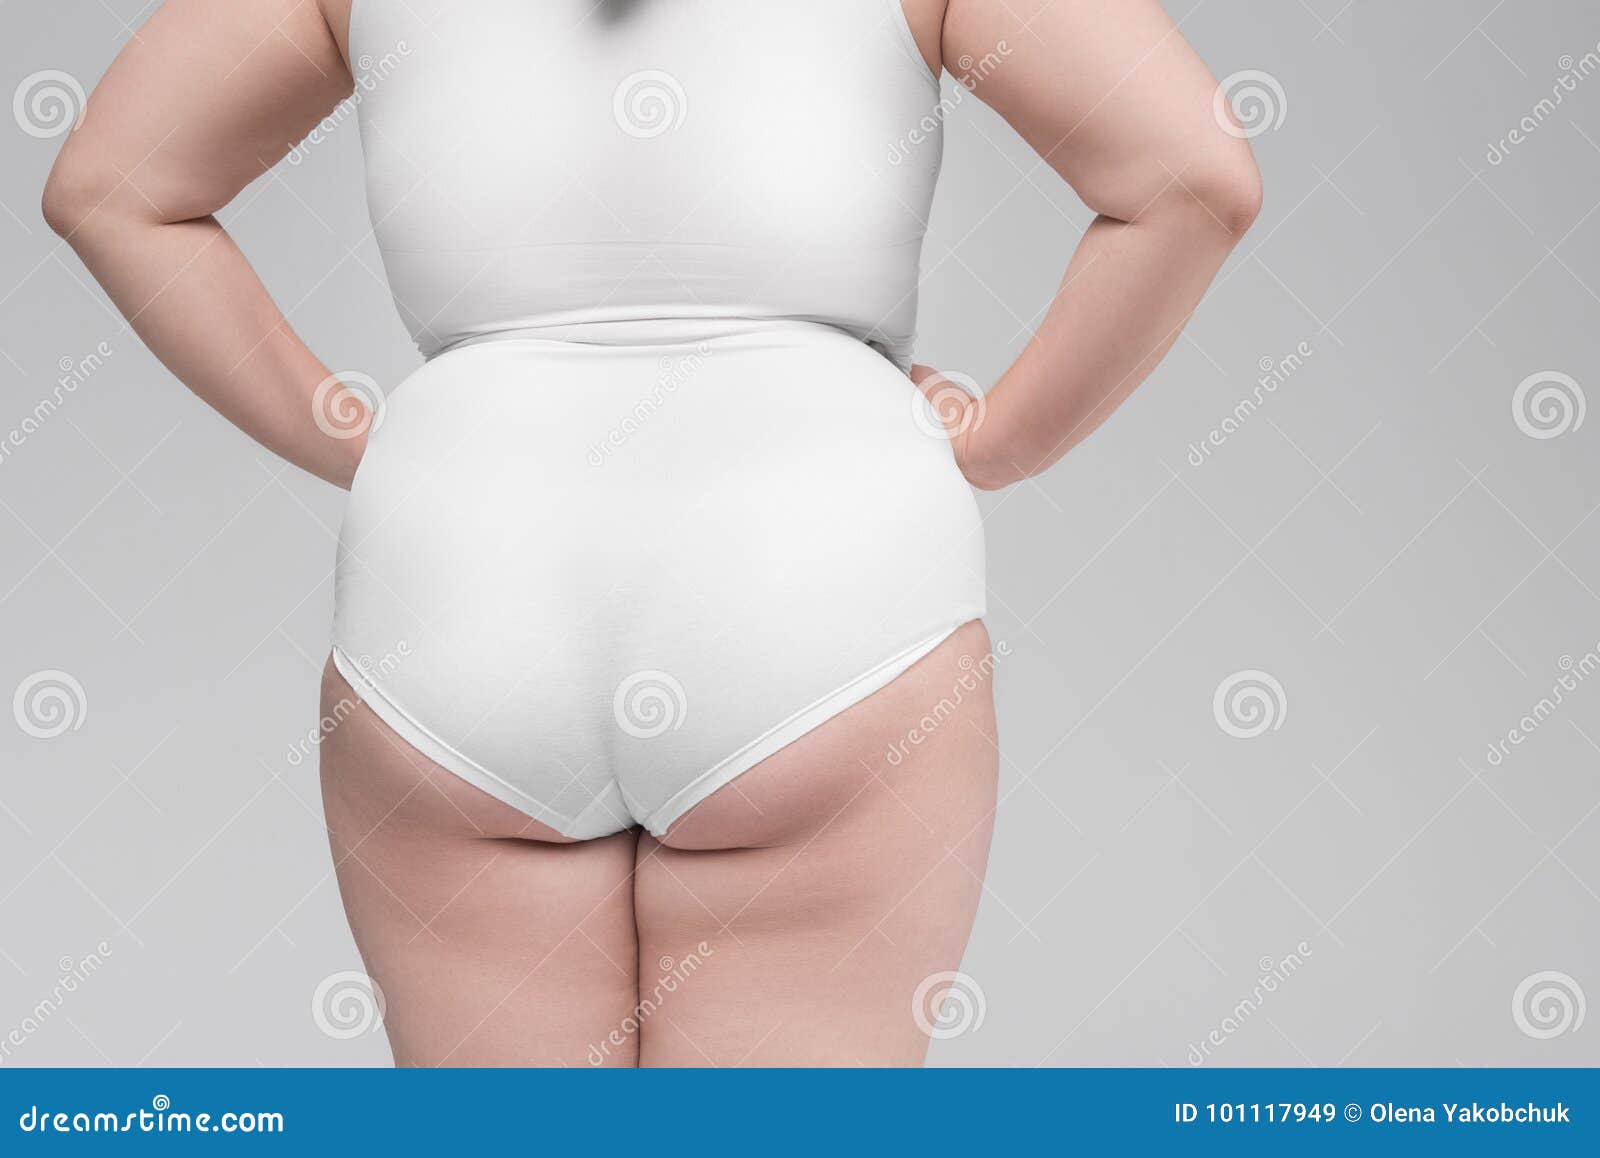 Chubby Woman in Lingerie Posing Stock Photo - Image of lingerie